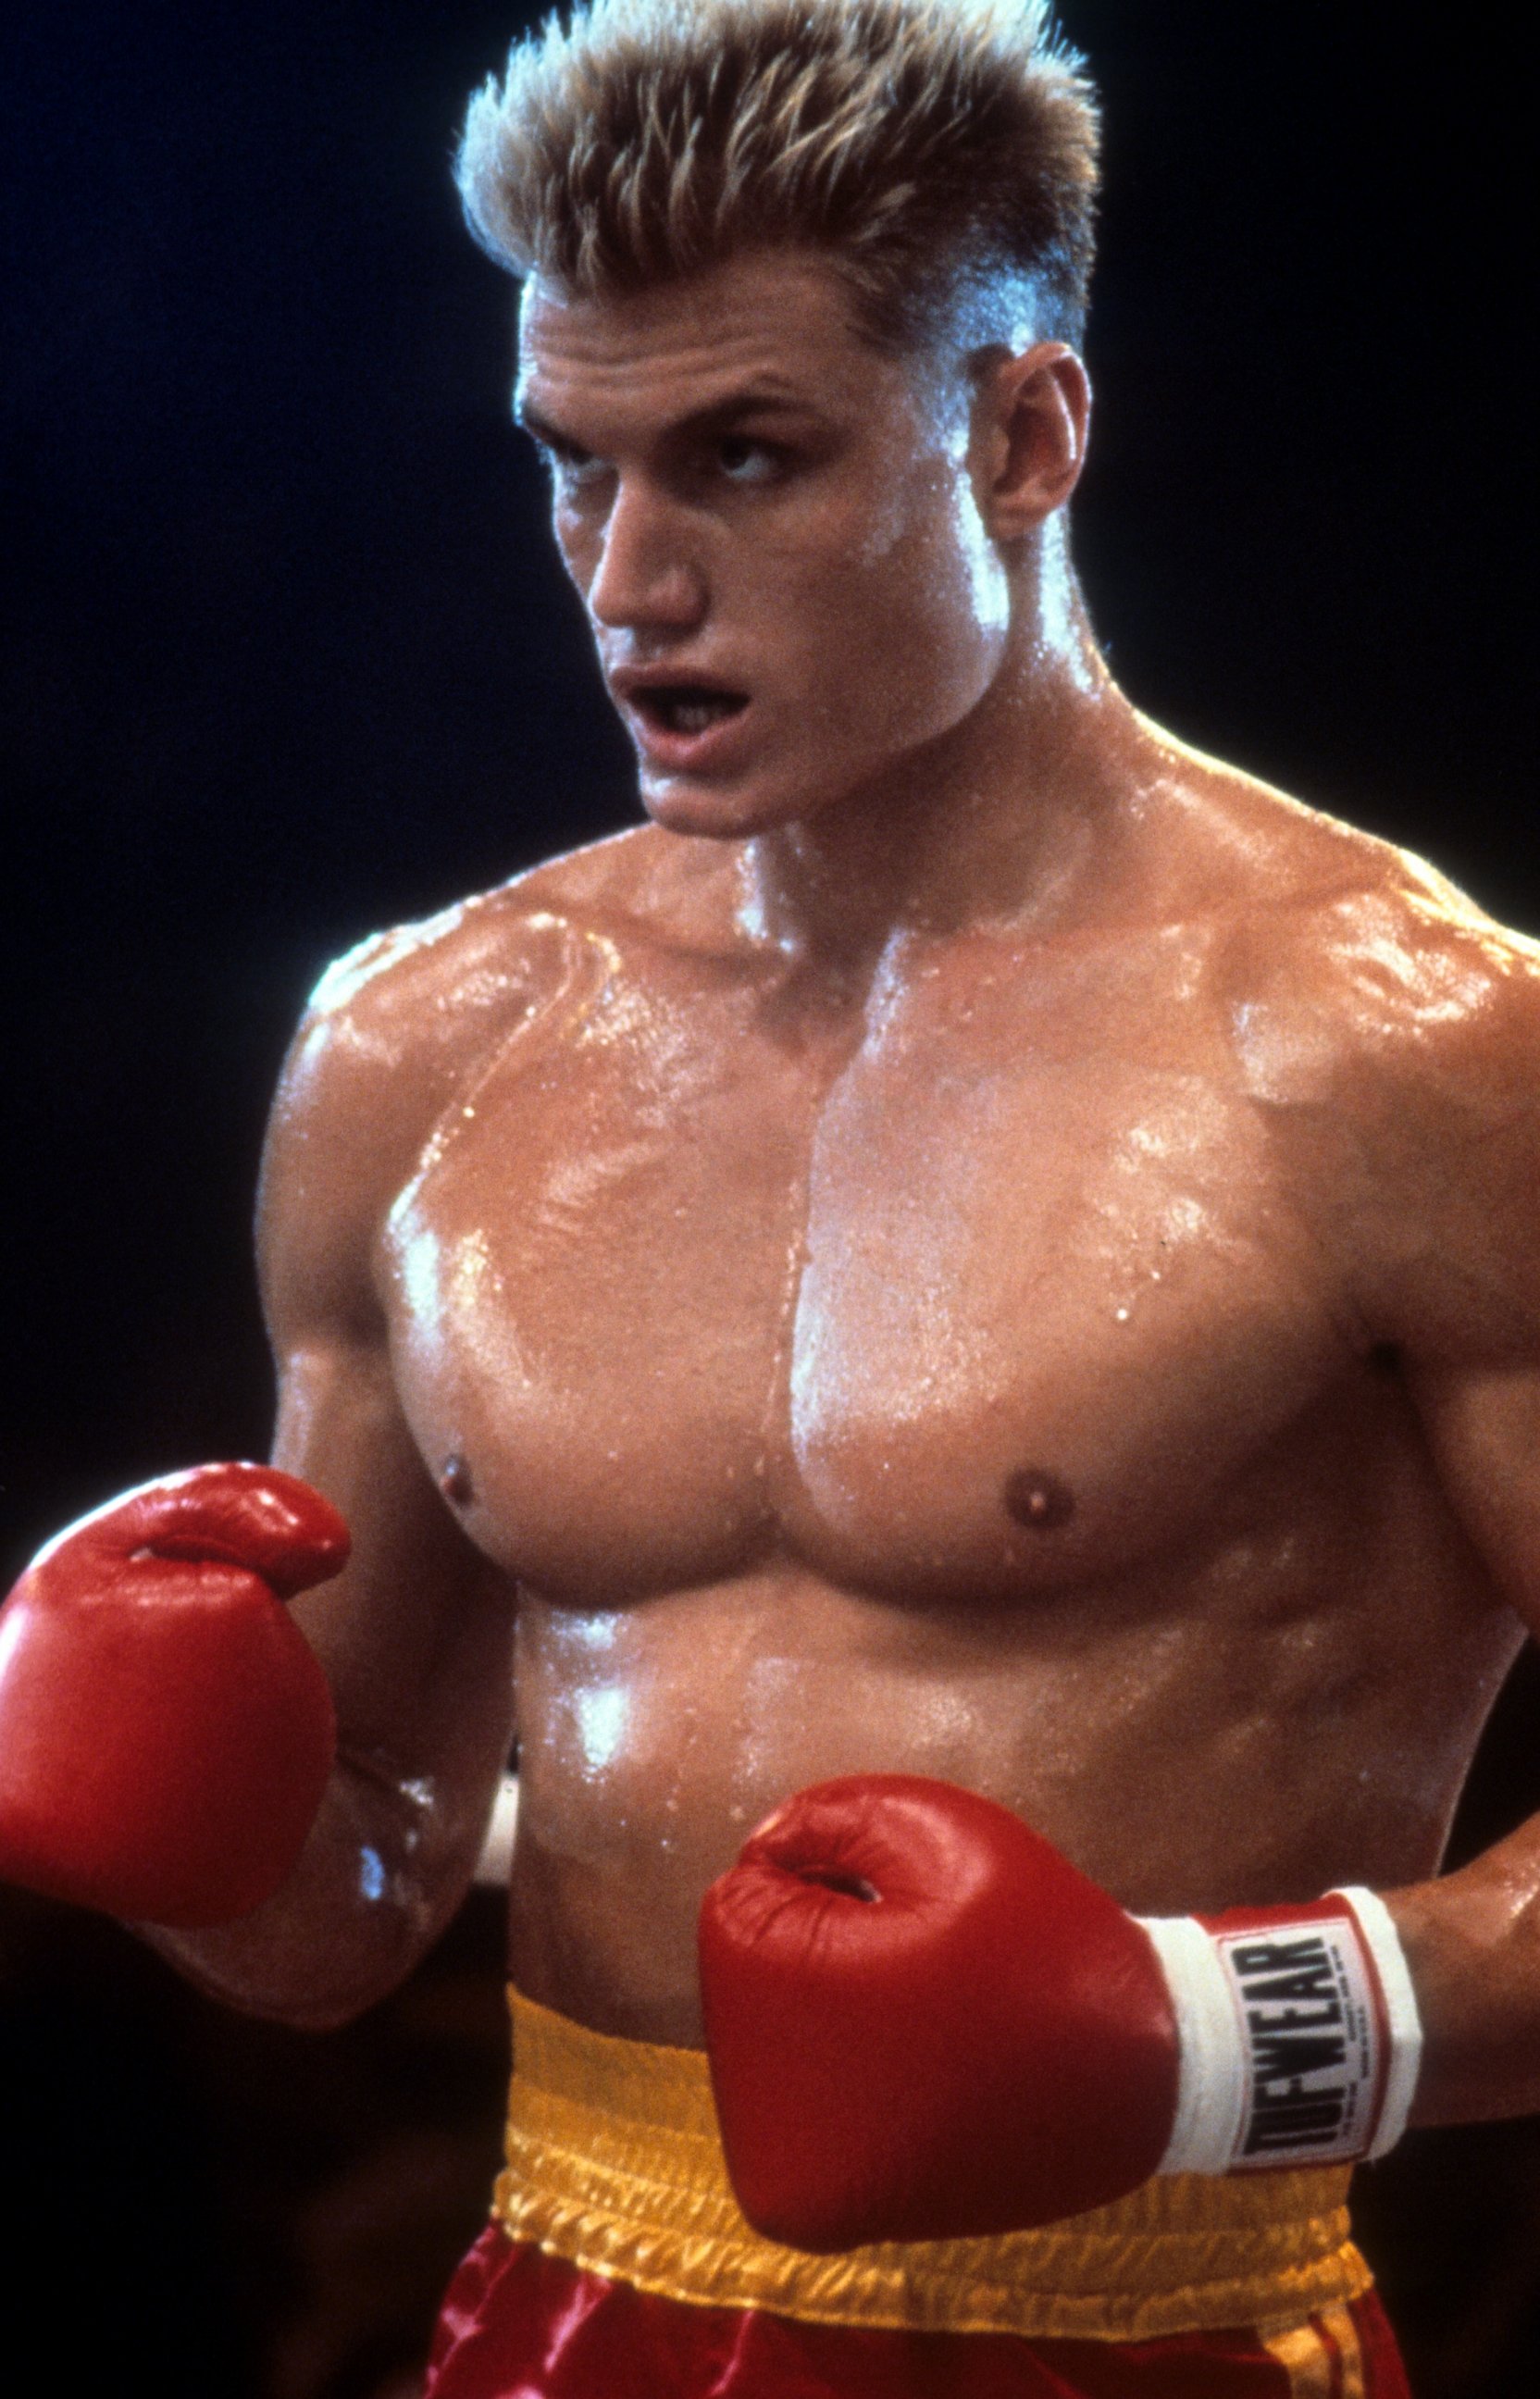 Rocky III Vs. Rocky IV: Which Sylvester Stallone Boxing Movie Is Better?